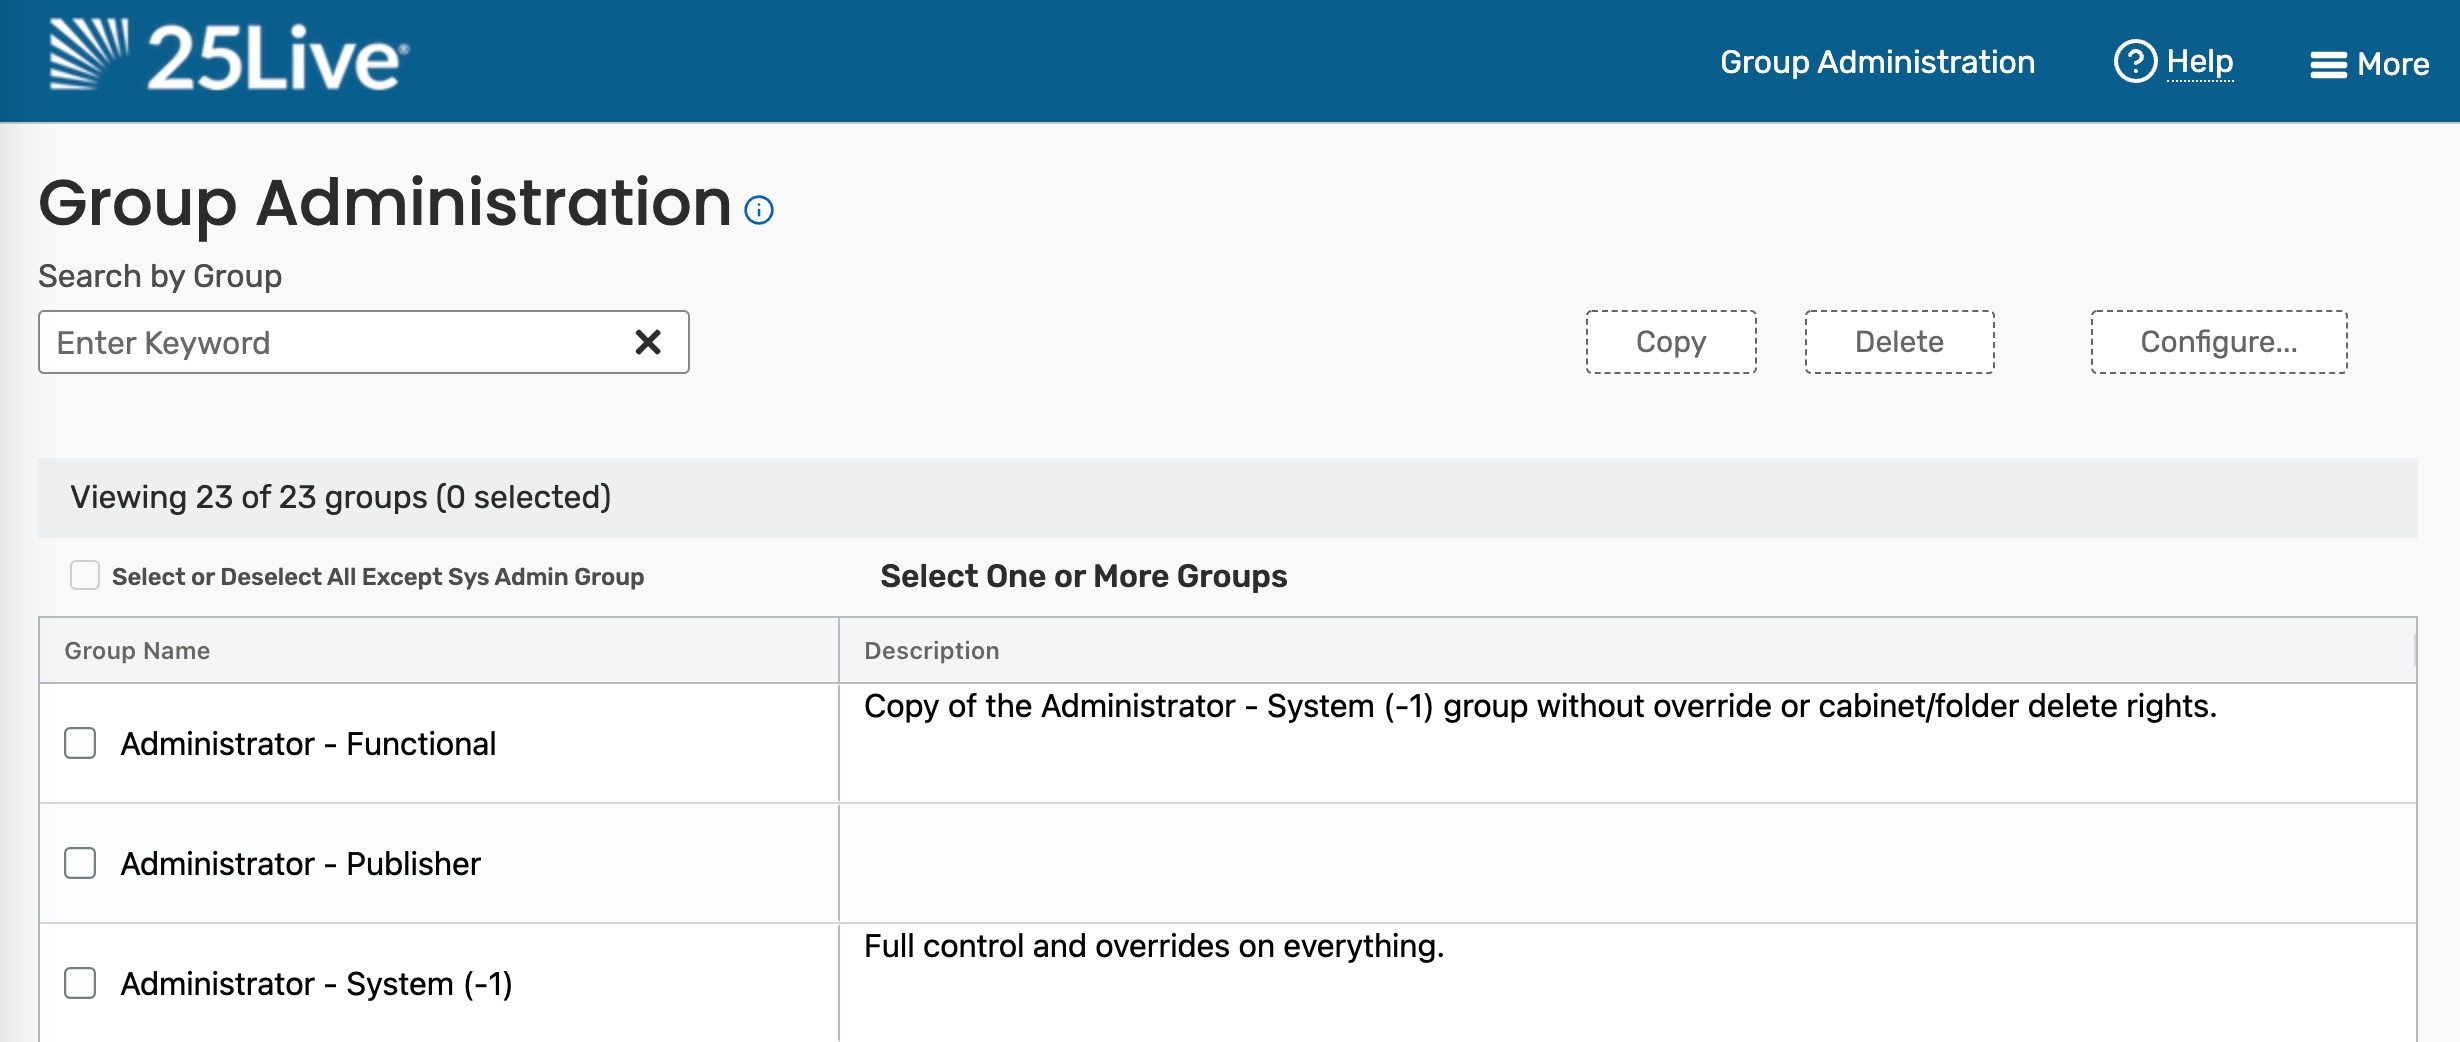 Group administration tool